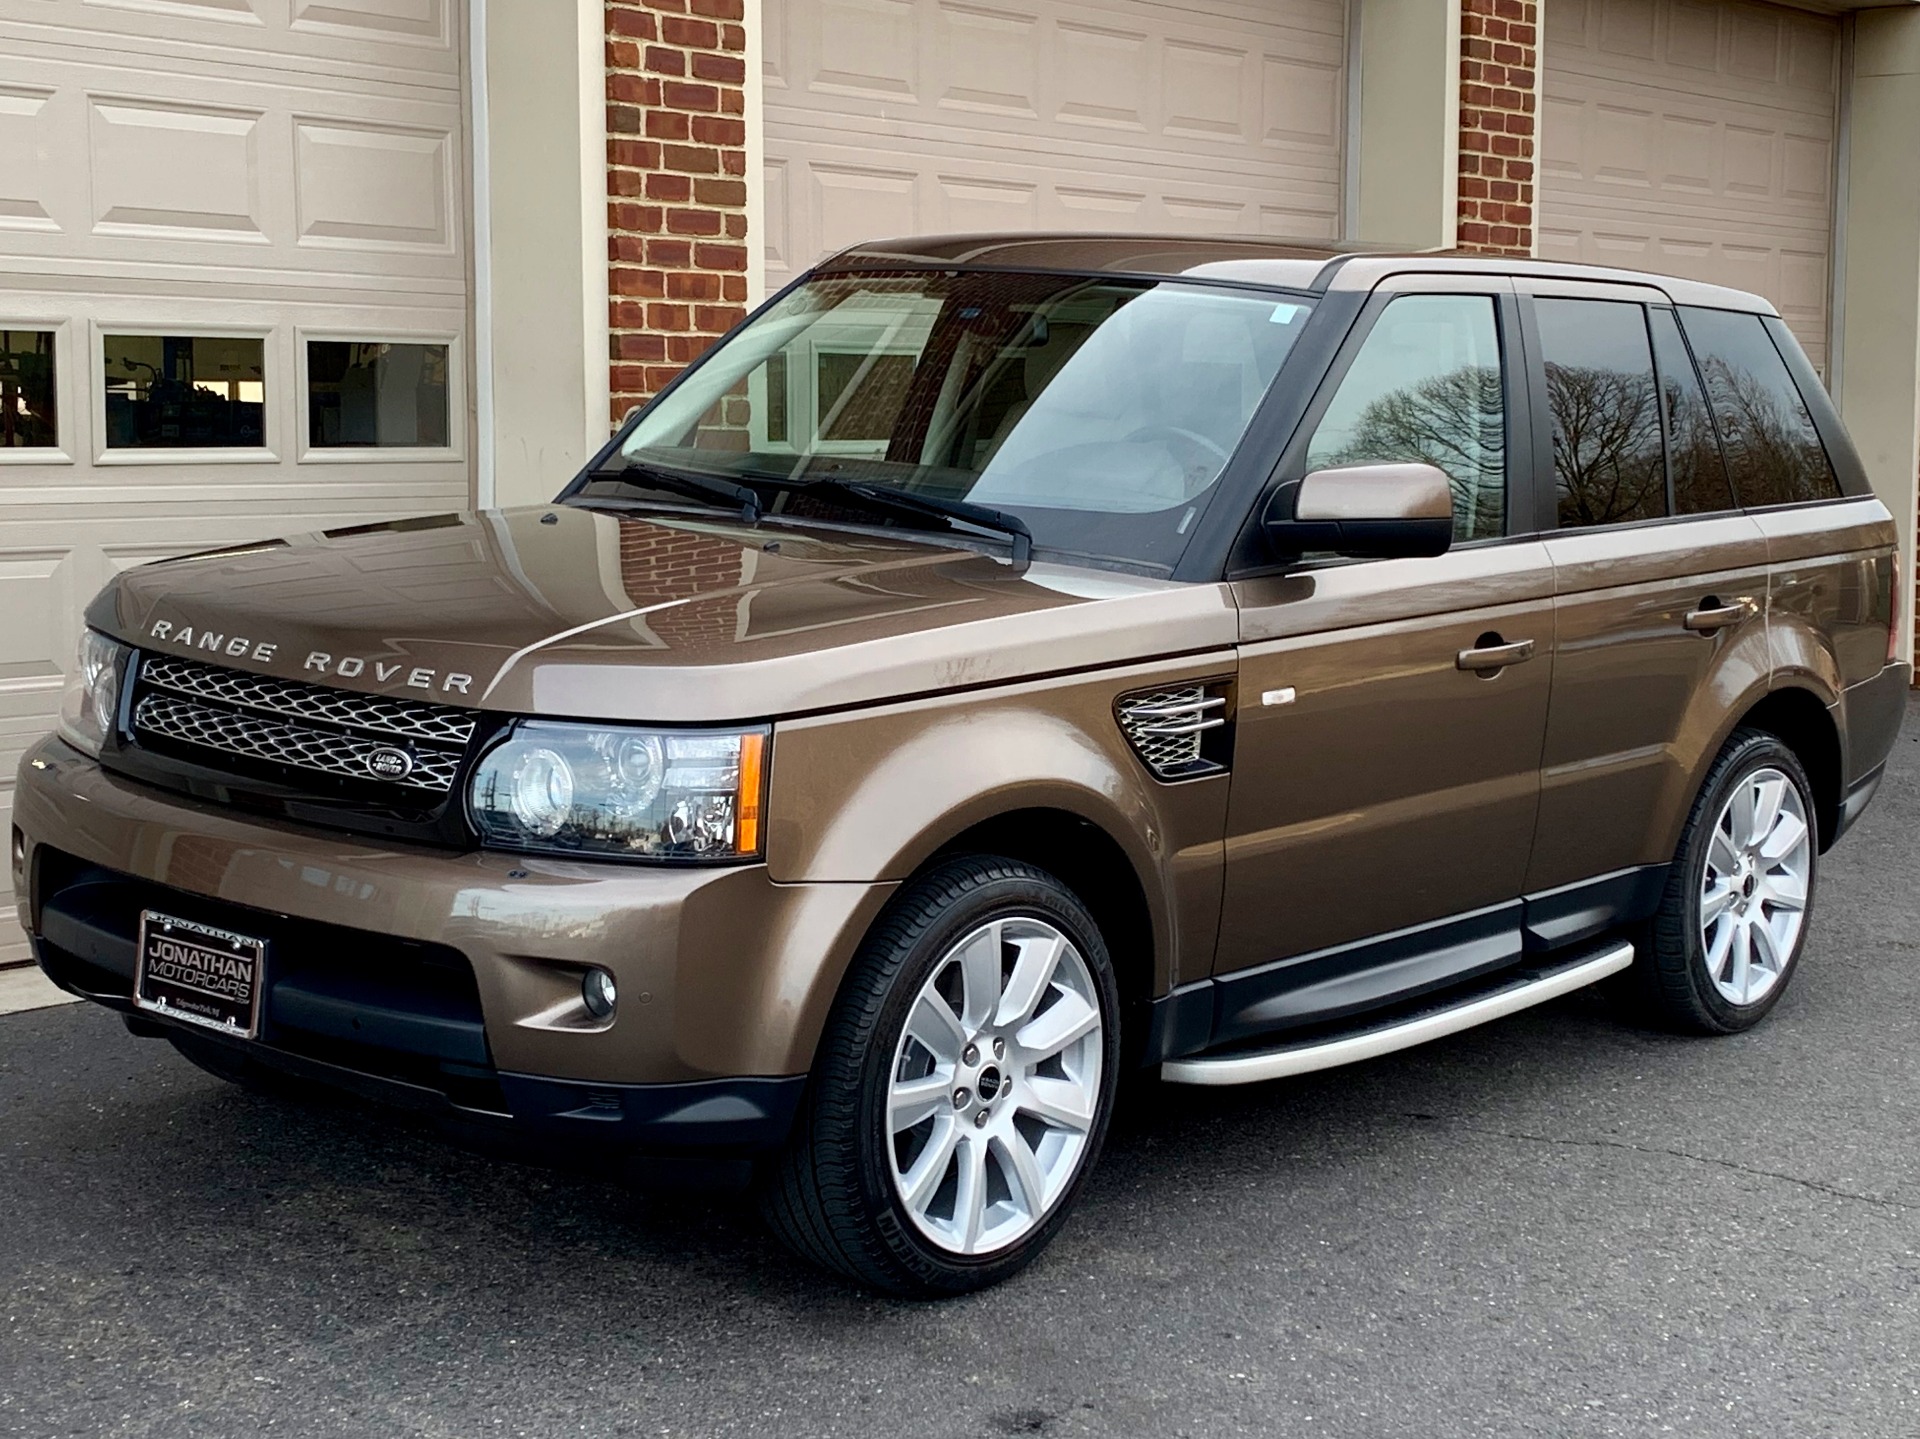 2013 Land Rover Range Rover Sport HSE LUX Stock # 769536 for sale near